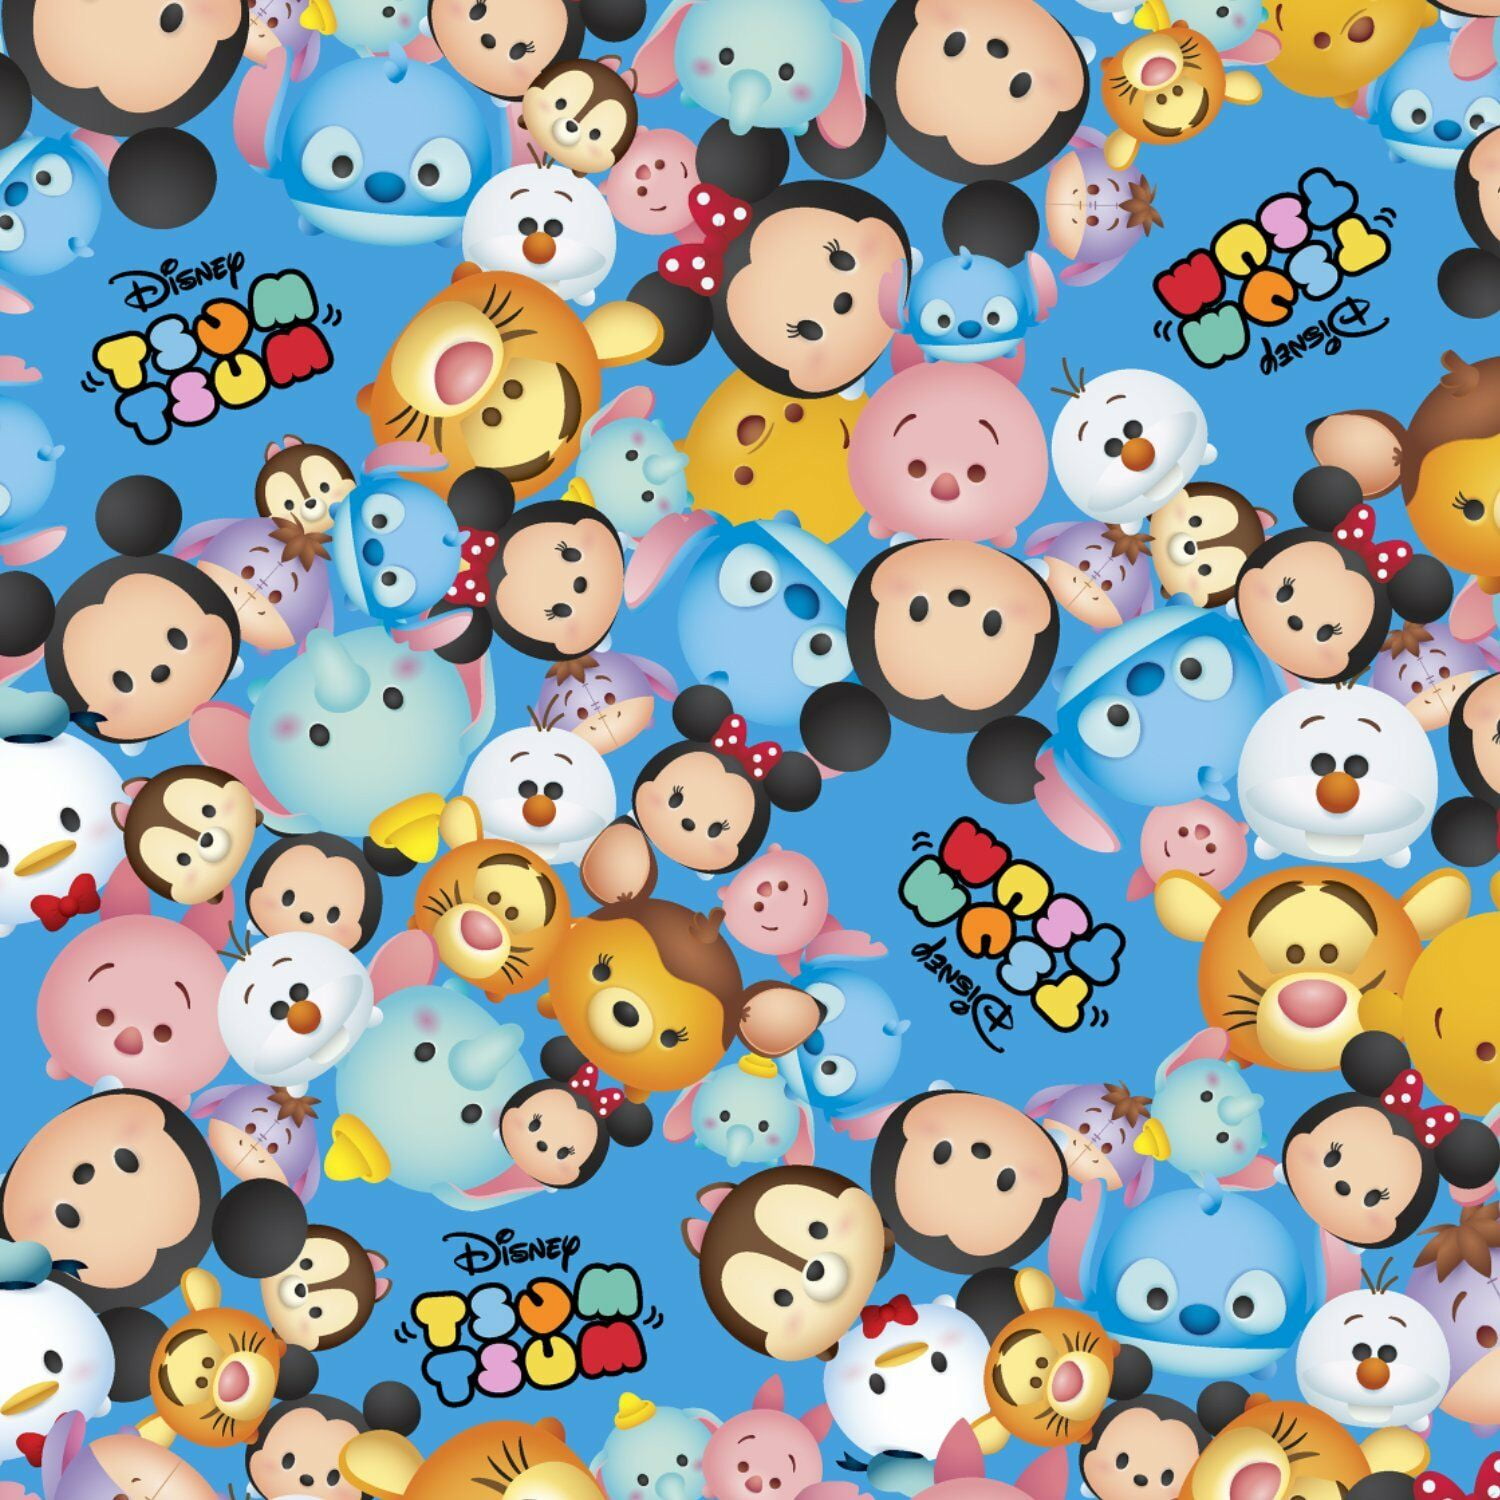 100% Cotton Fabric Springs Creative Minnie & Mickey Mouse TsumTsum Holiday 